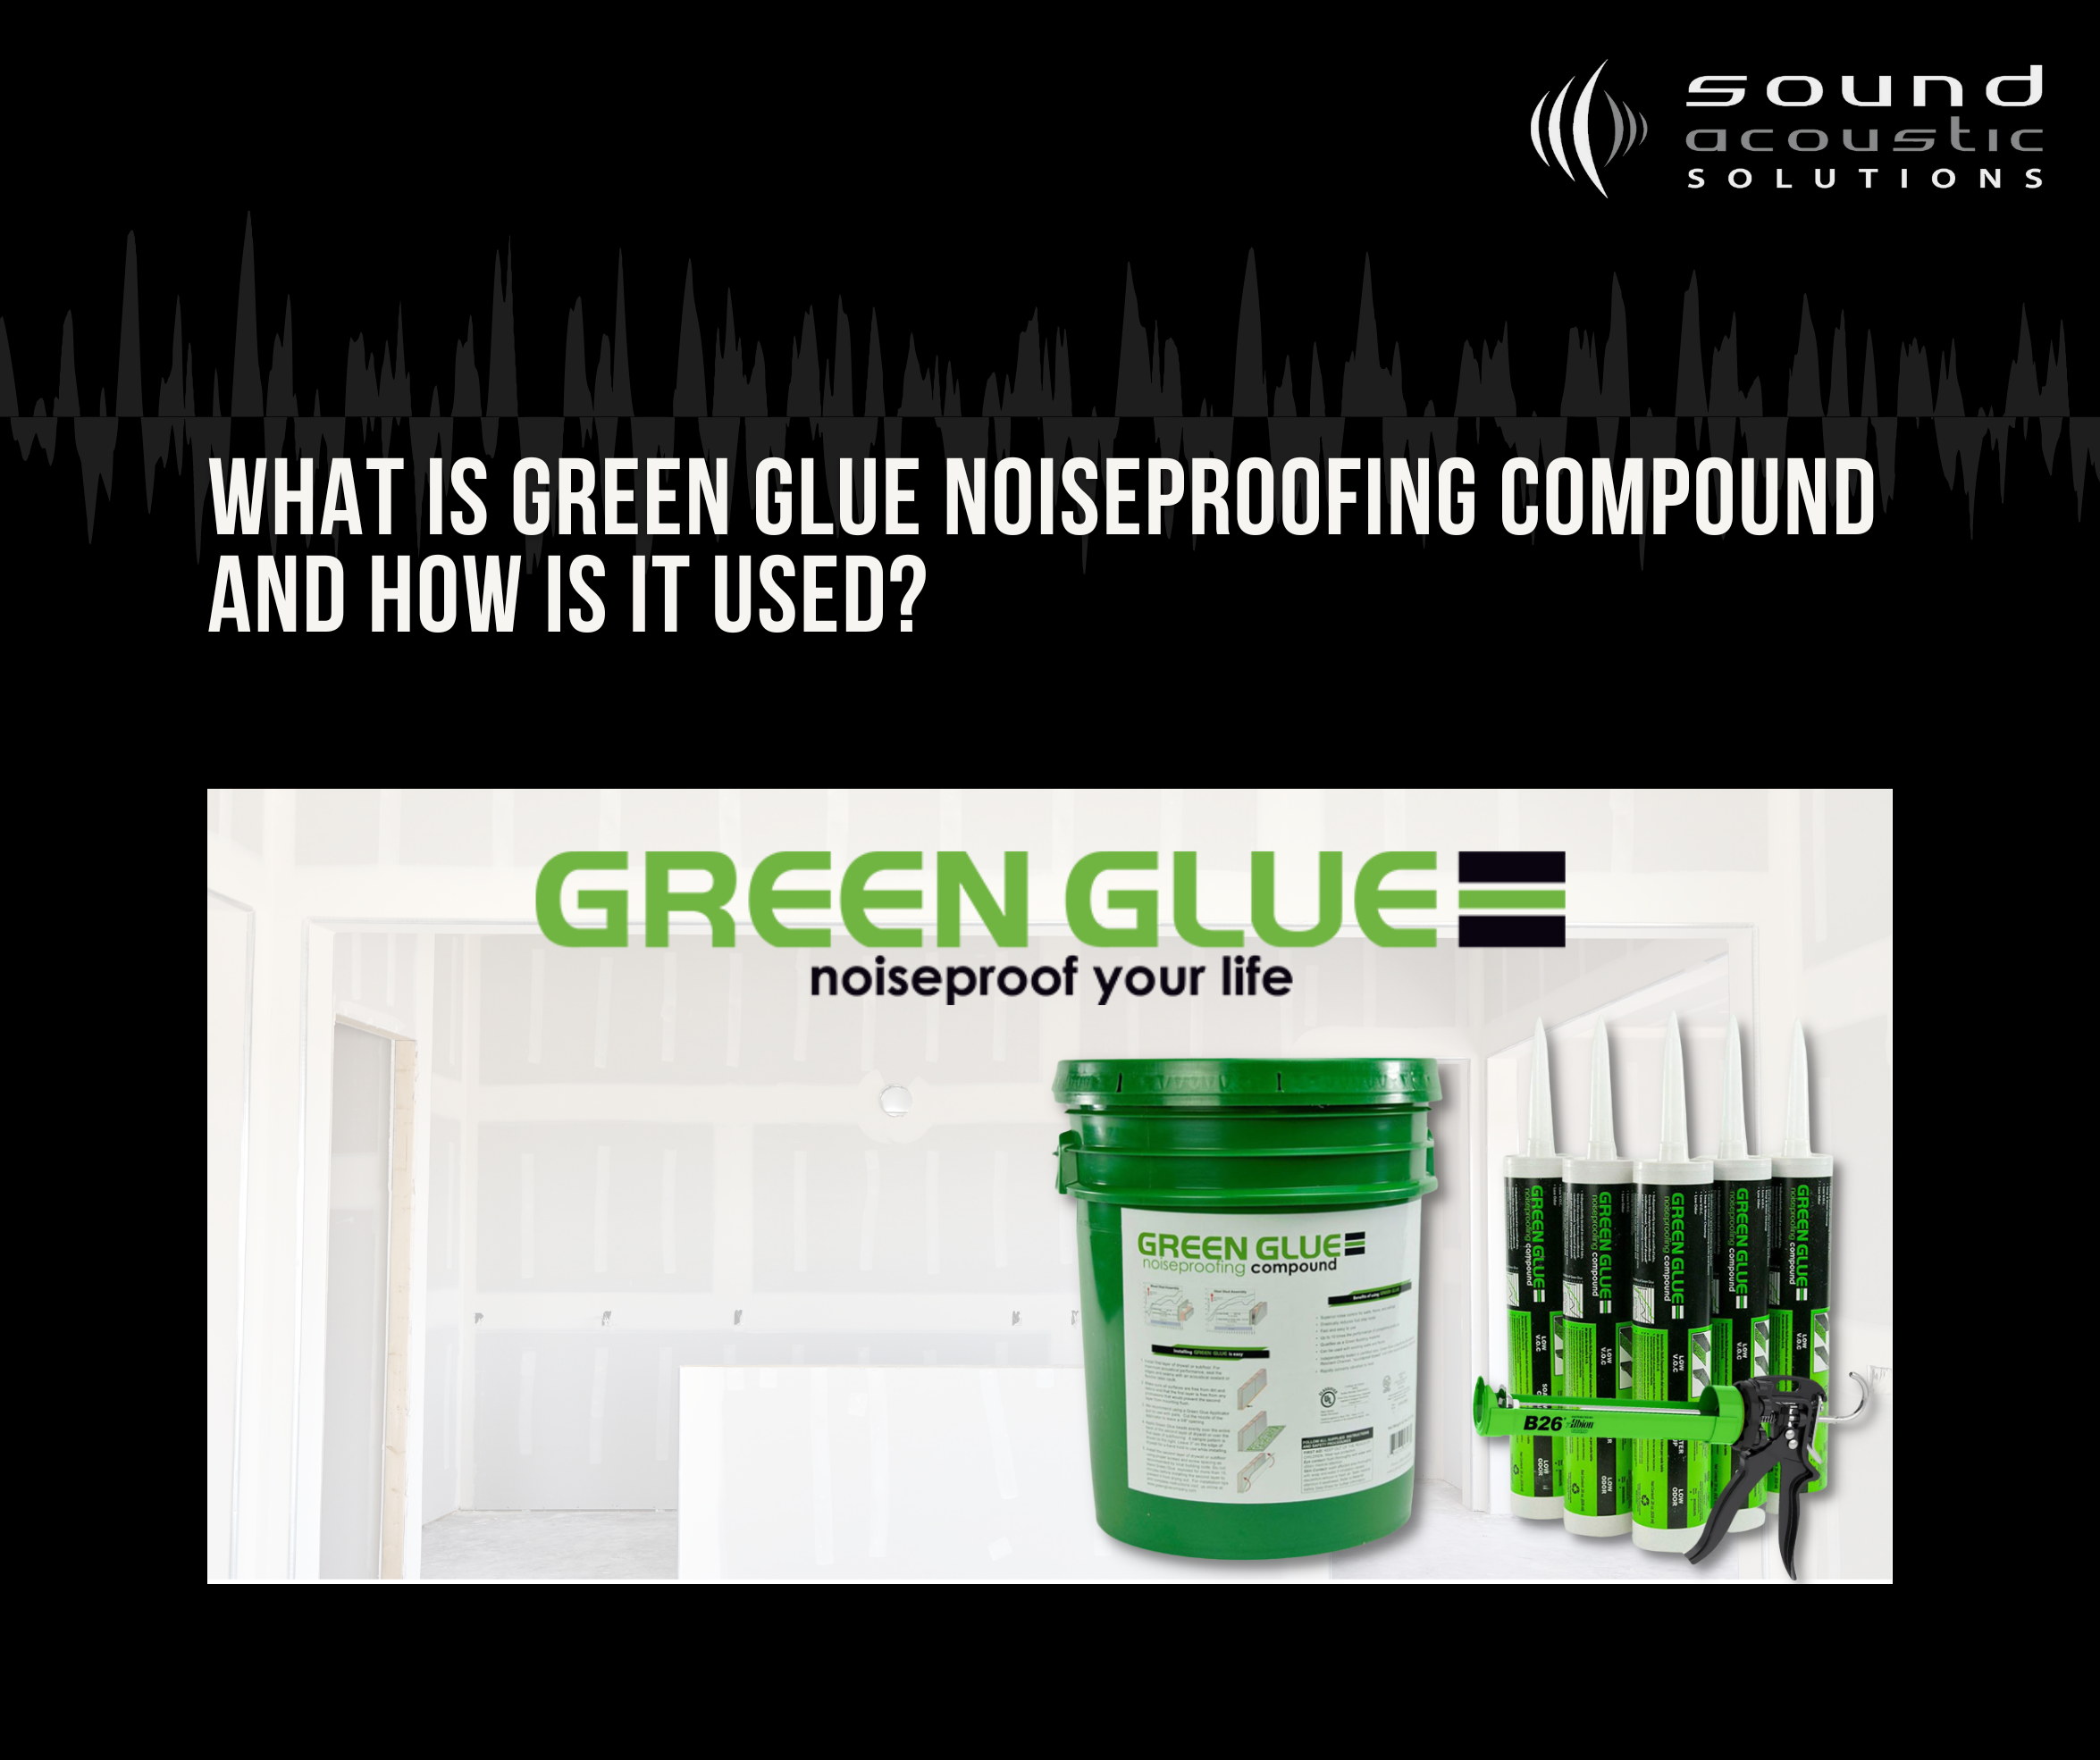 What is Green Glue, and How is it Used?